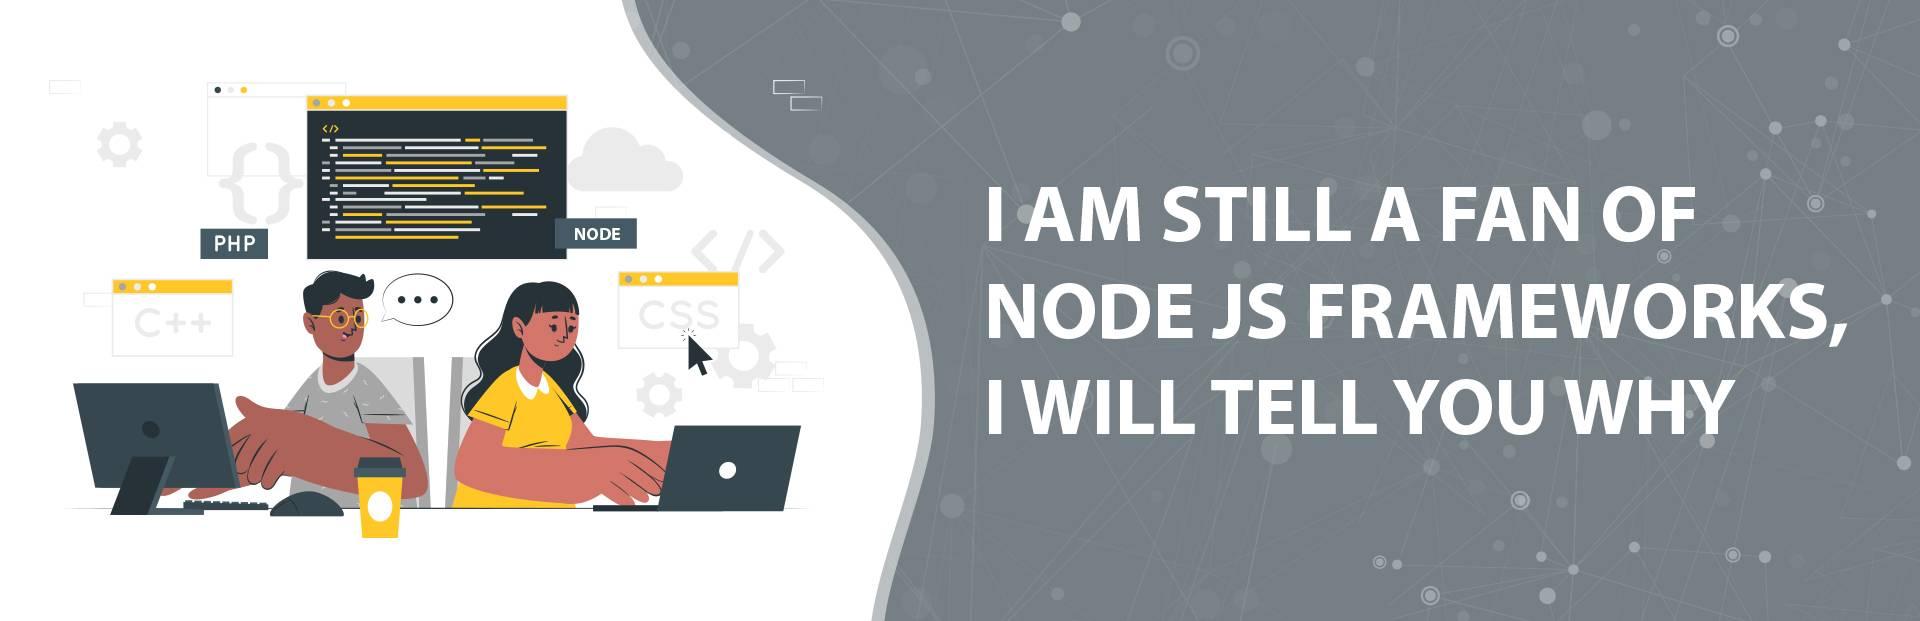 I am still a fan of  Node js frameworks, I will tell you why?